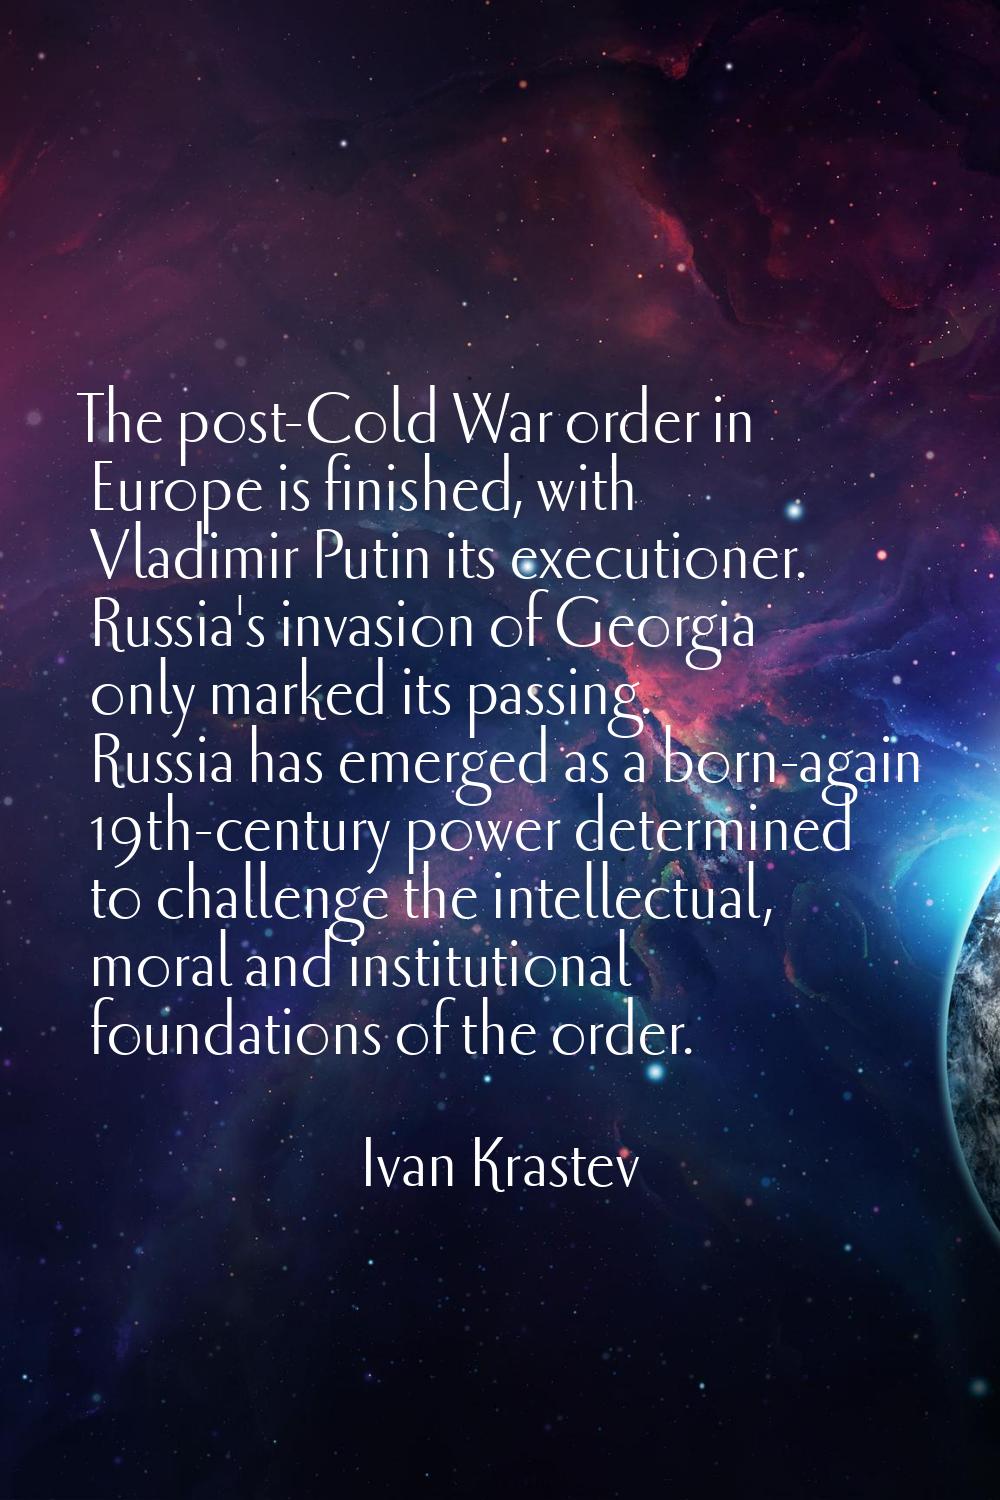 The post-Cold War order in Europe is finished, with Vladimir Putin its executioner. Russia's invasi